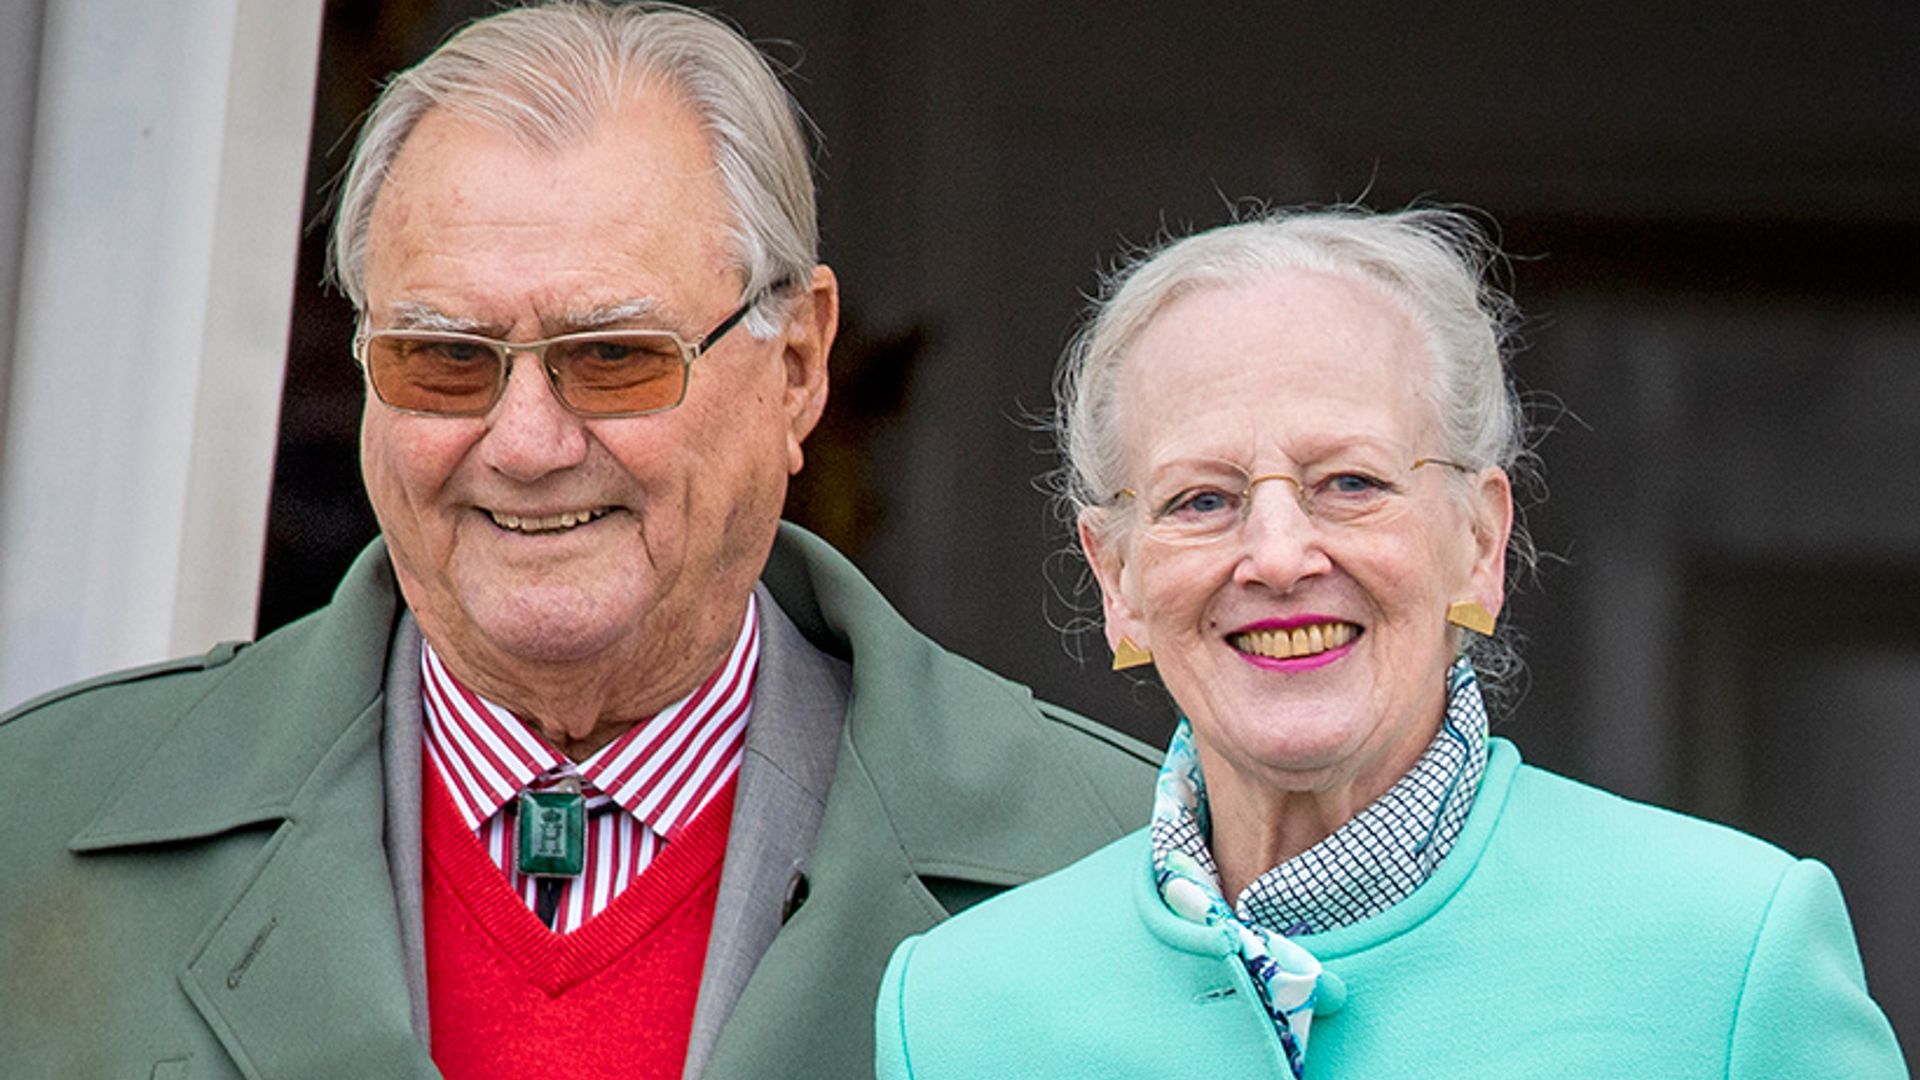 Prince Henrik of Denmark, 83, admitted to hospital following controversial comments about his burial